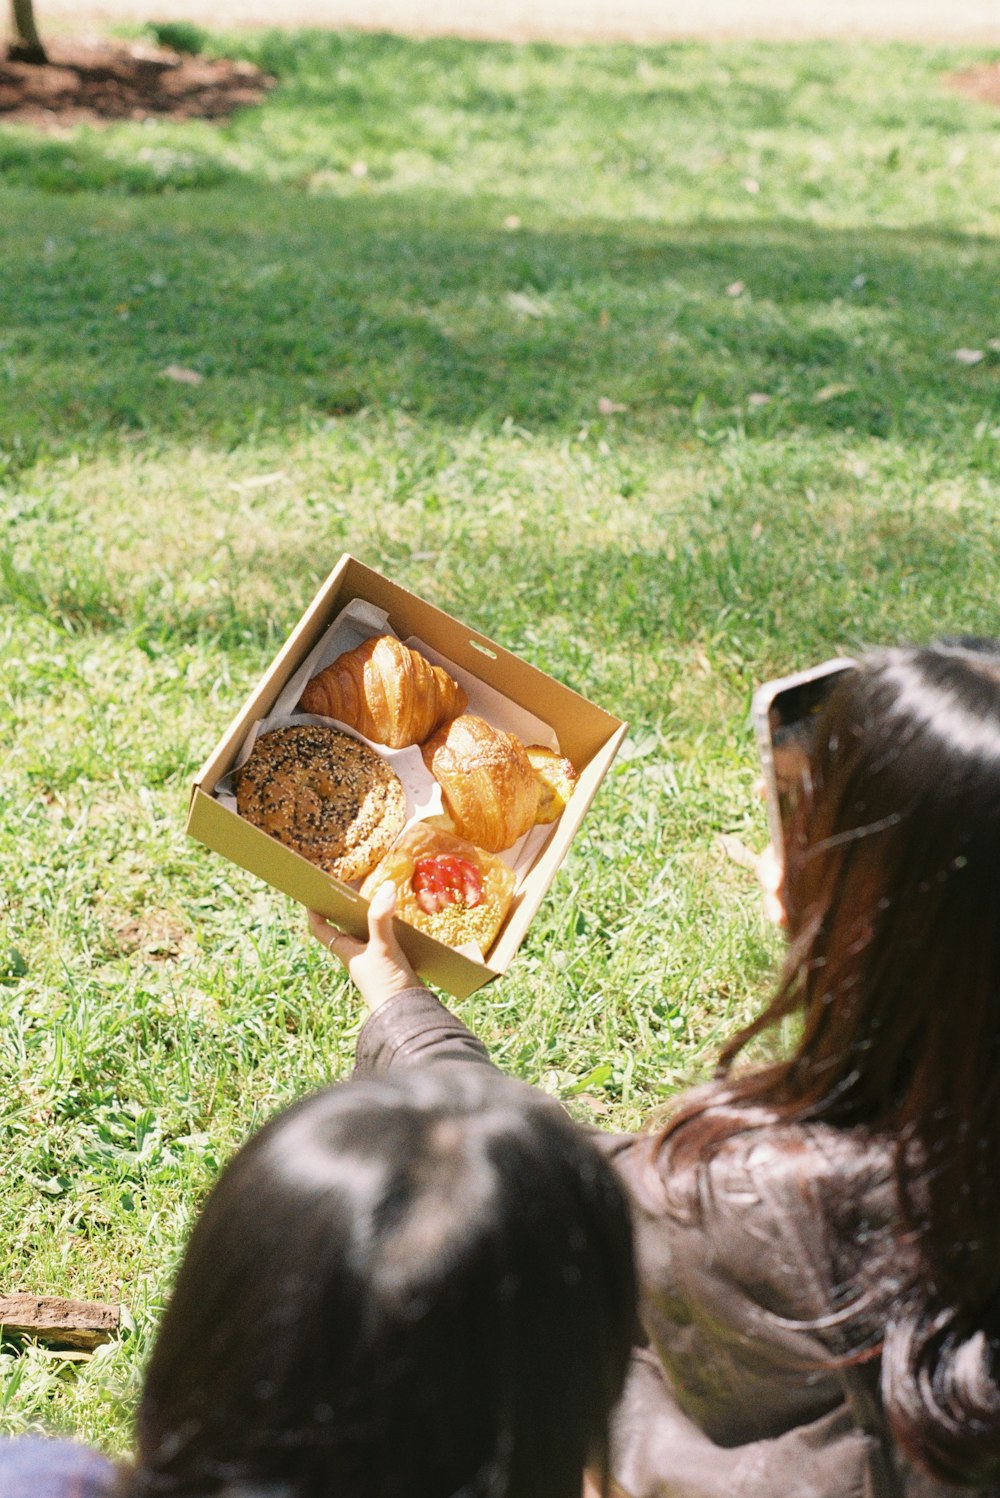 a person holding a box of food in the grass